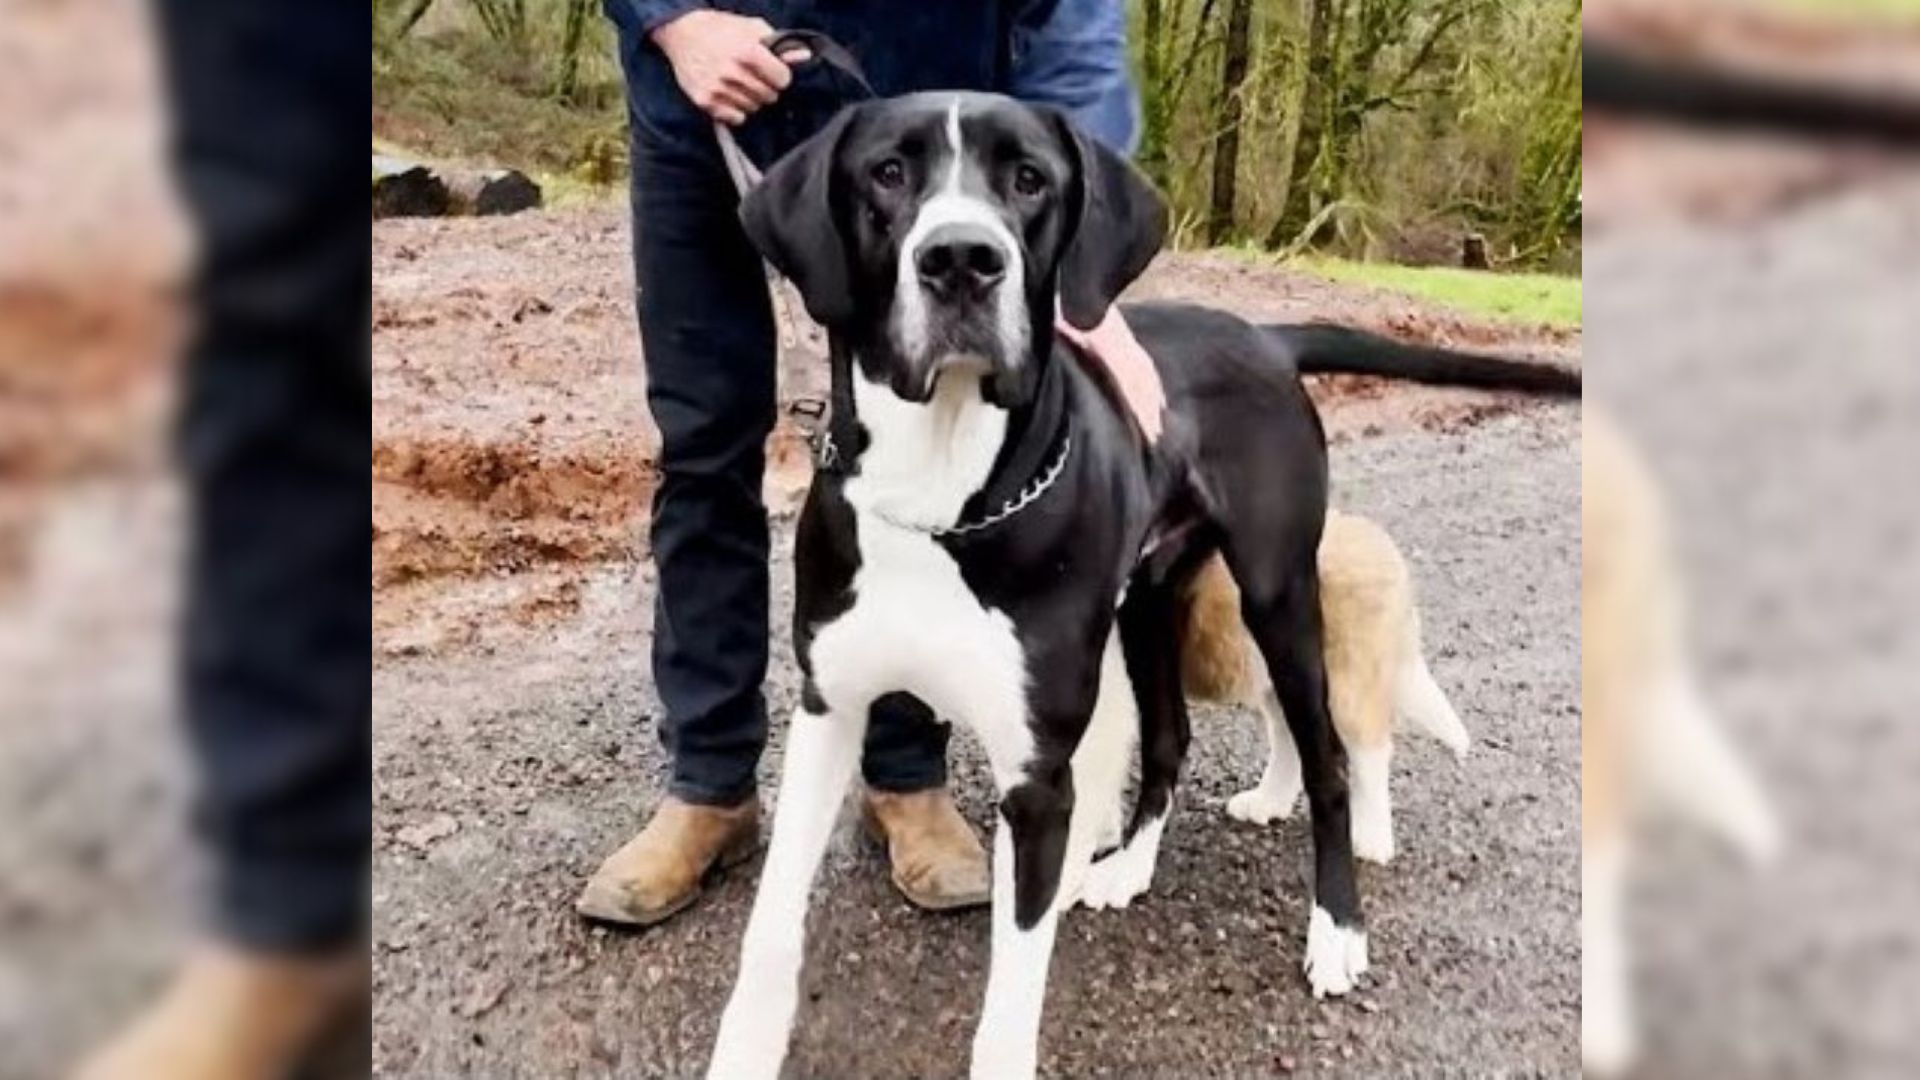 Big Dog Returned To The Shelter Due To Separation Anxiety, Now Has His Own Pack 